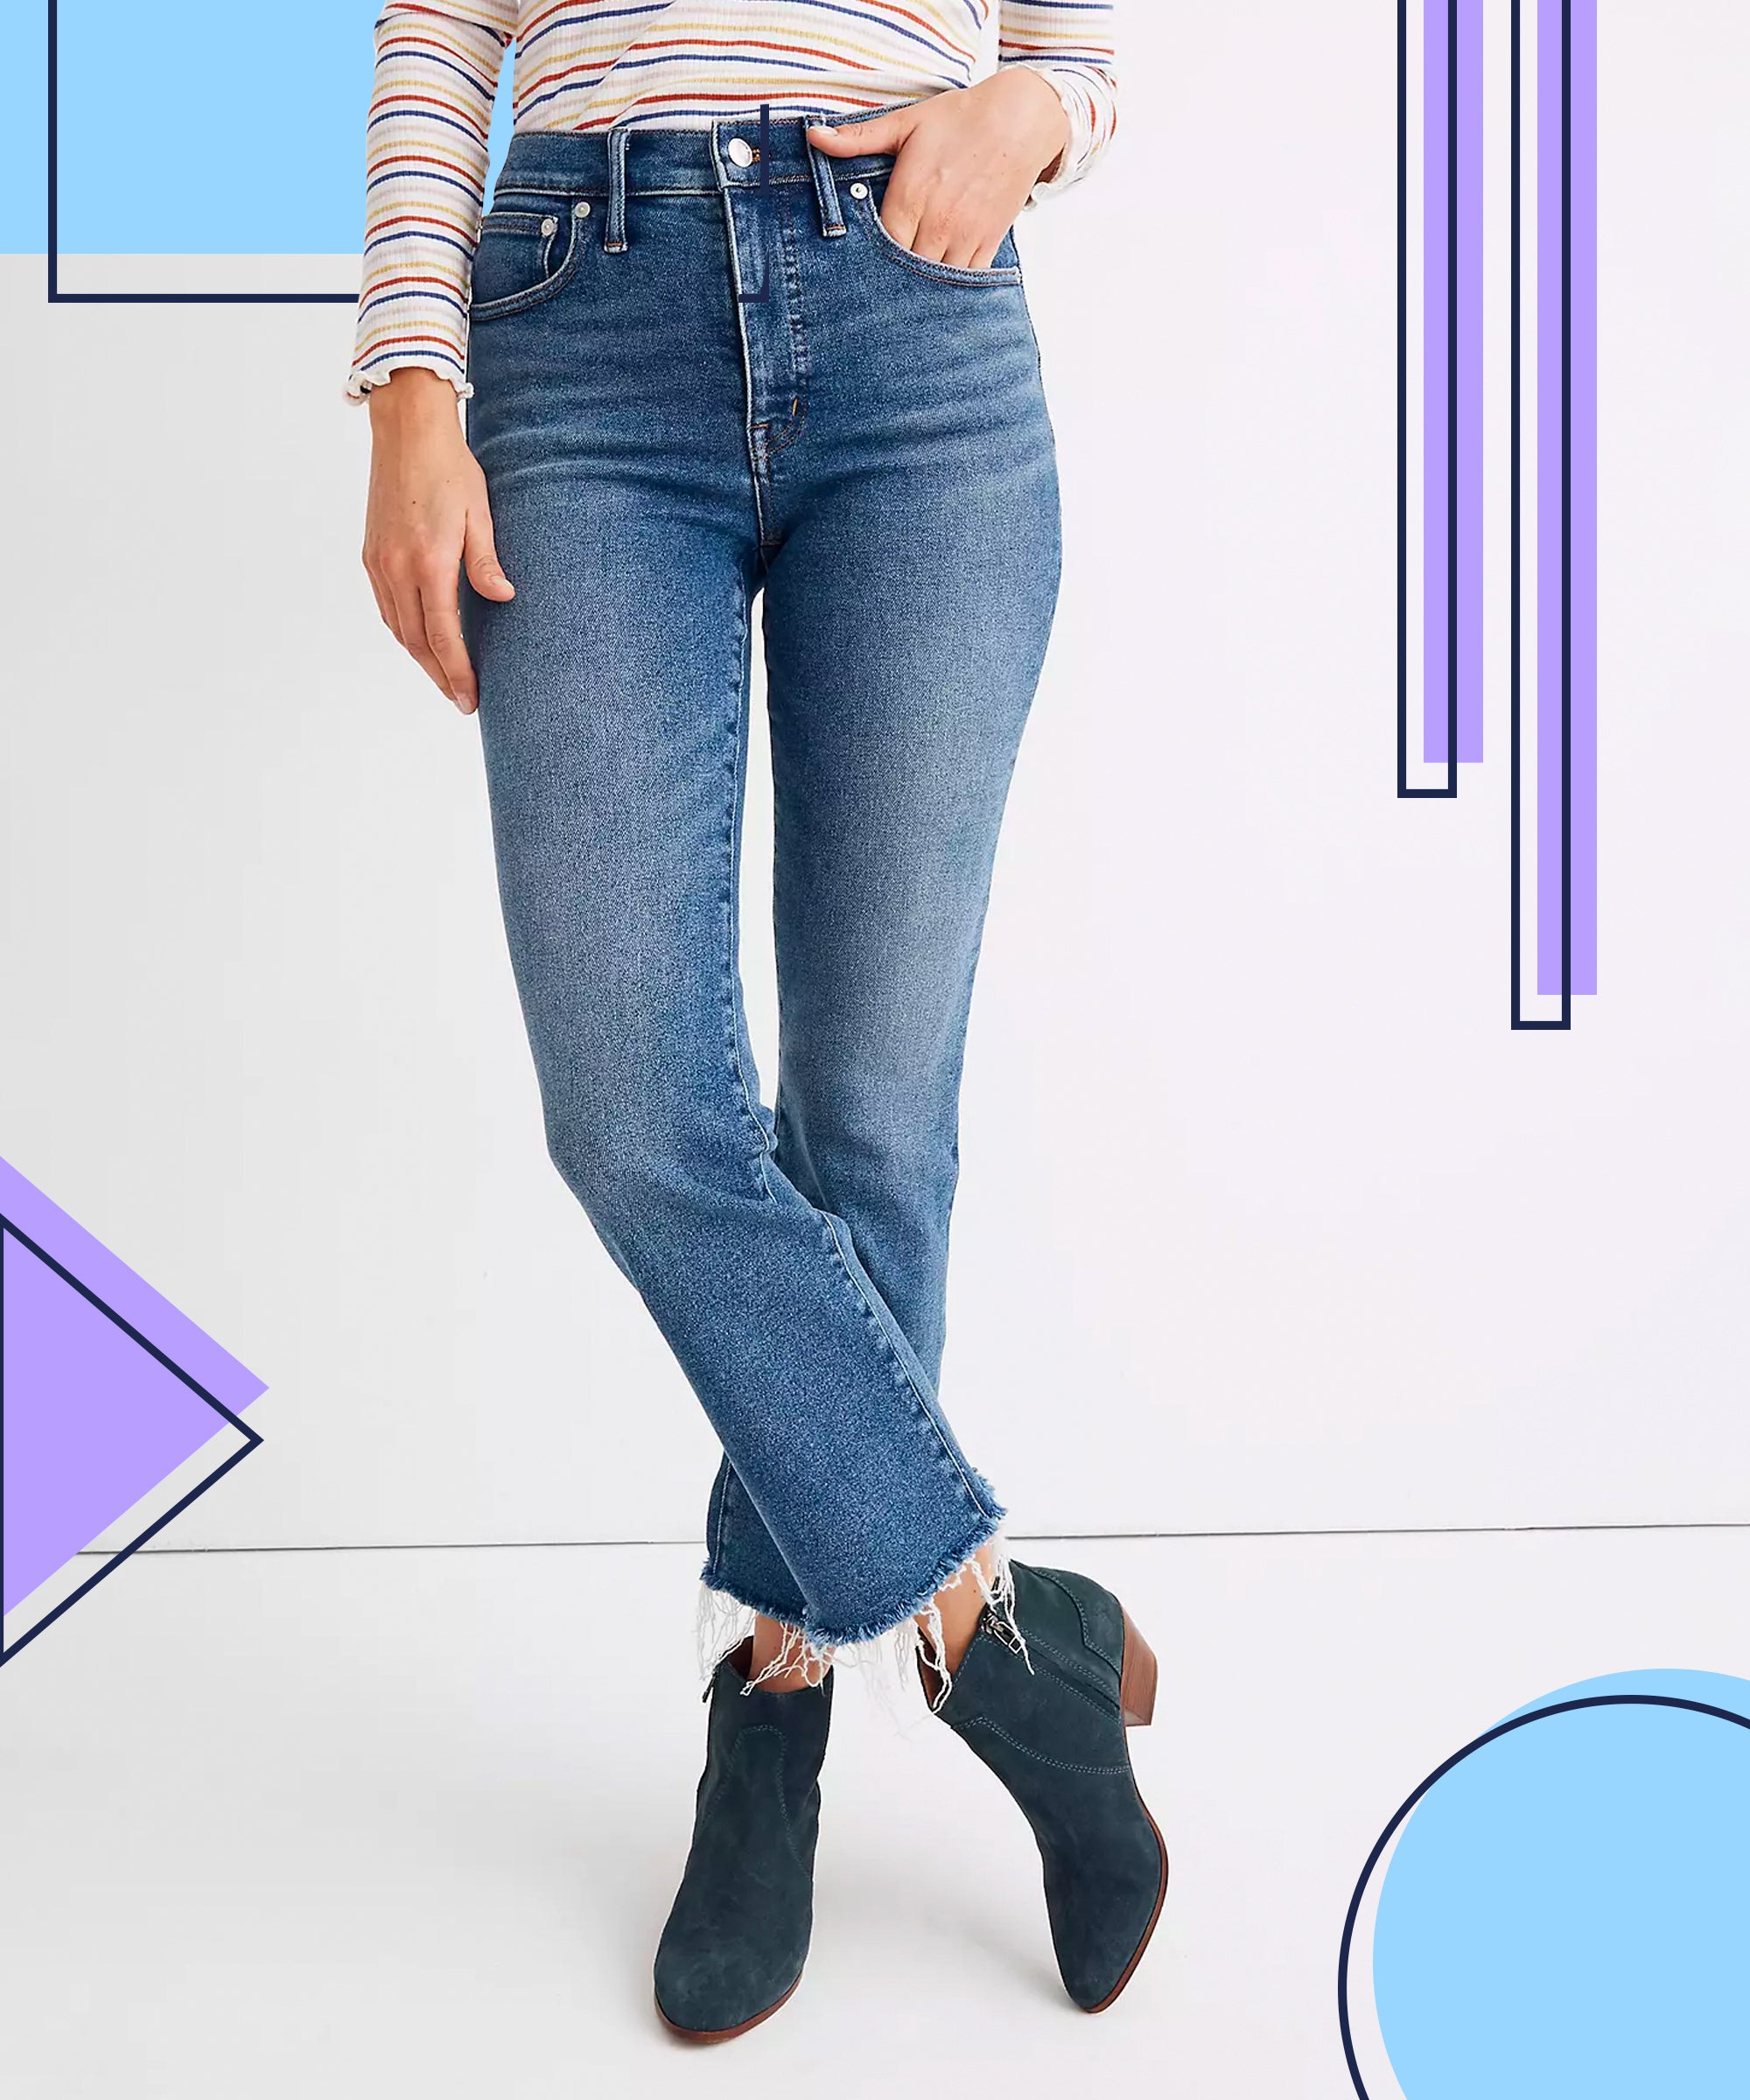 madewell jeans deal